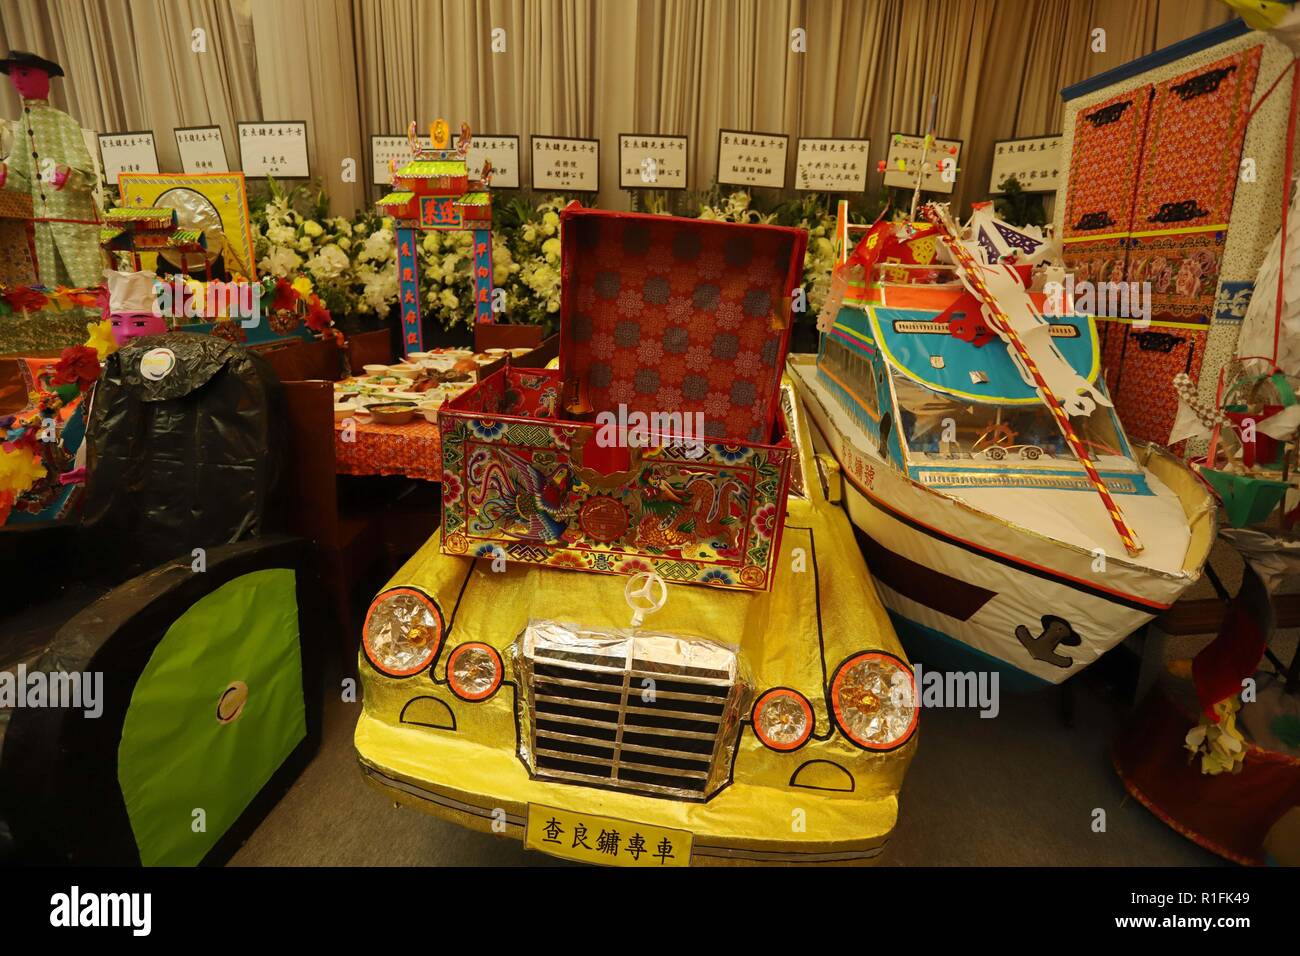 Hong Kong. 12th Nov, 2018. Paper crafted cars and boats for the late JIN YONG ( aged 94 ), a most celebrated Hong Kong Wuxia novelist are being displayed at the funeral parlor during memorial service.Chinese burn paper-crafted offerings for the dead during funeral service so that such 'items' or 'possessions' will be given to the dead to serve them in the afterworld. Nov-12, 2018 Hong Kong.ZUMA/Liau Chung-ren Credit: Liau Chung-ren/ZUMA Wire/Alamy Live News Stock Photo